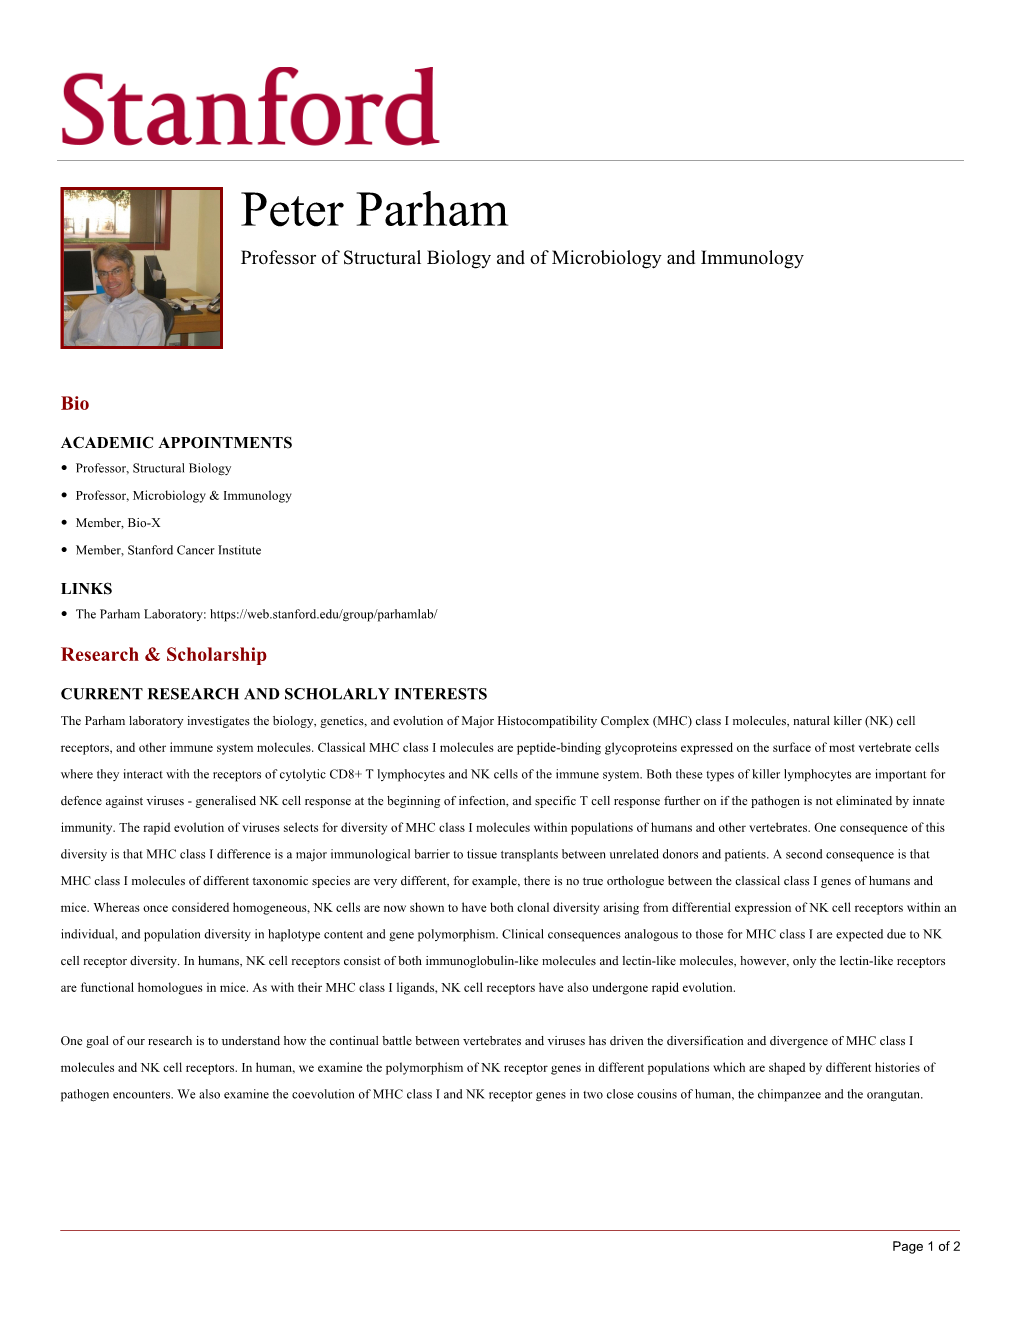 Peter Parham Professor of Structural Biology and of Microbiology and Immunology